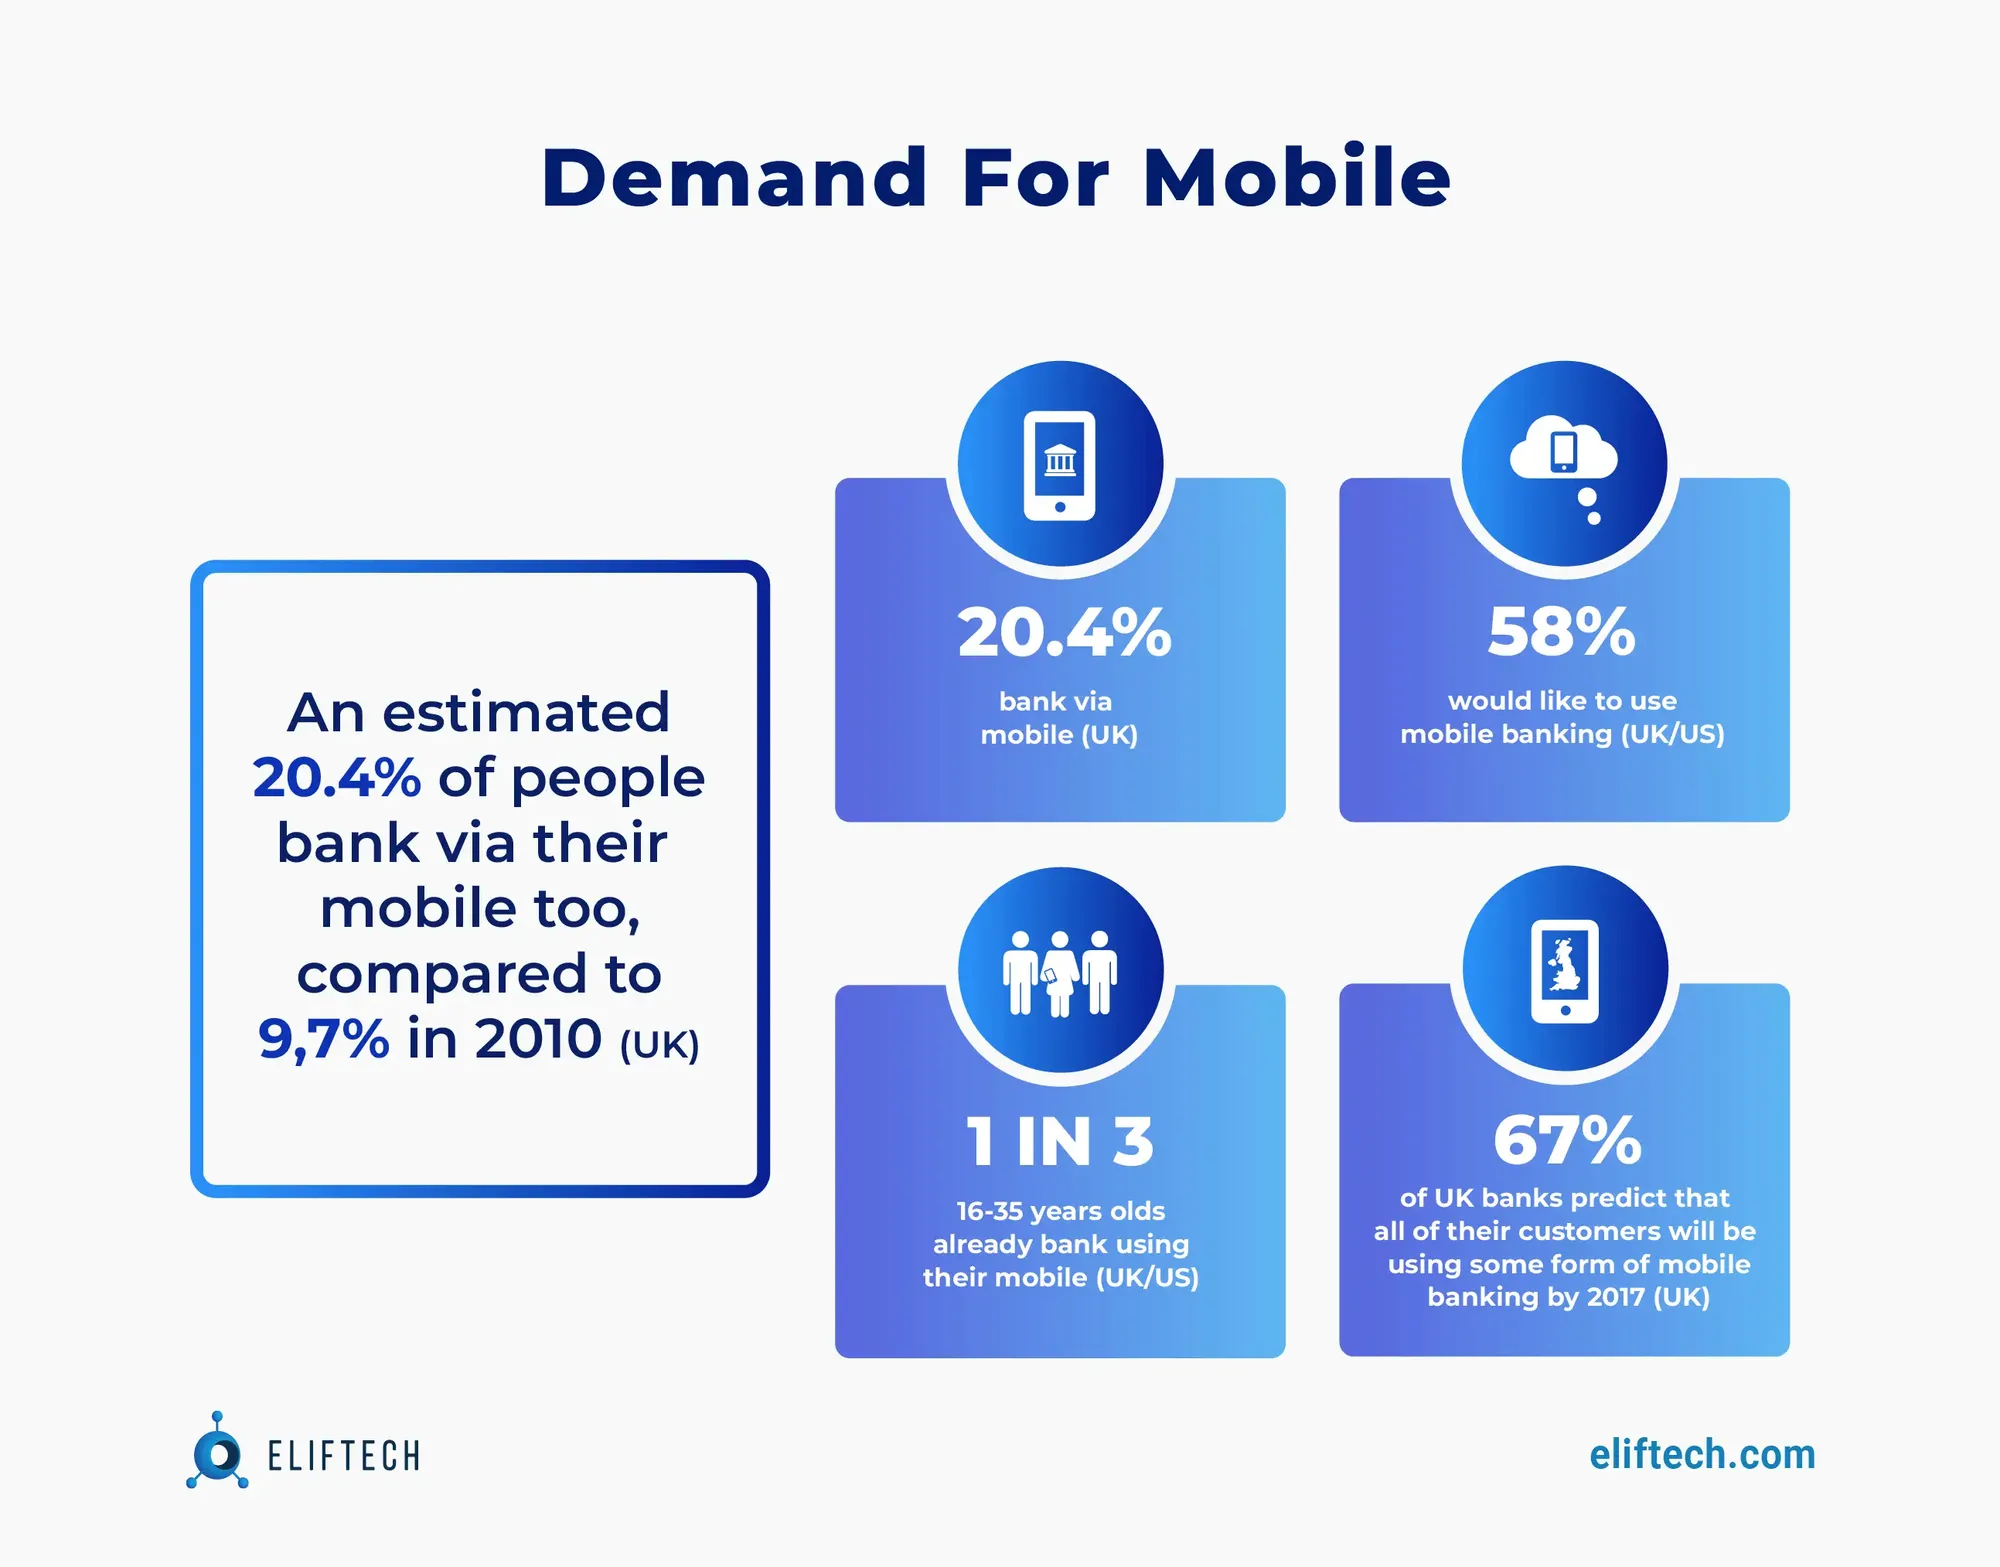 Demand for mobile